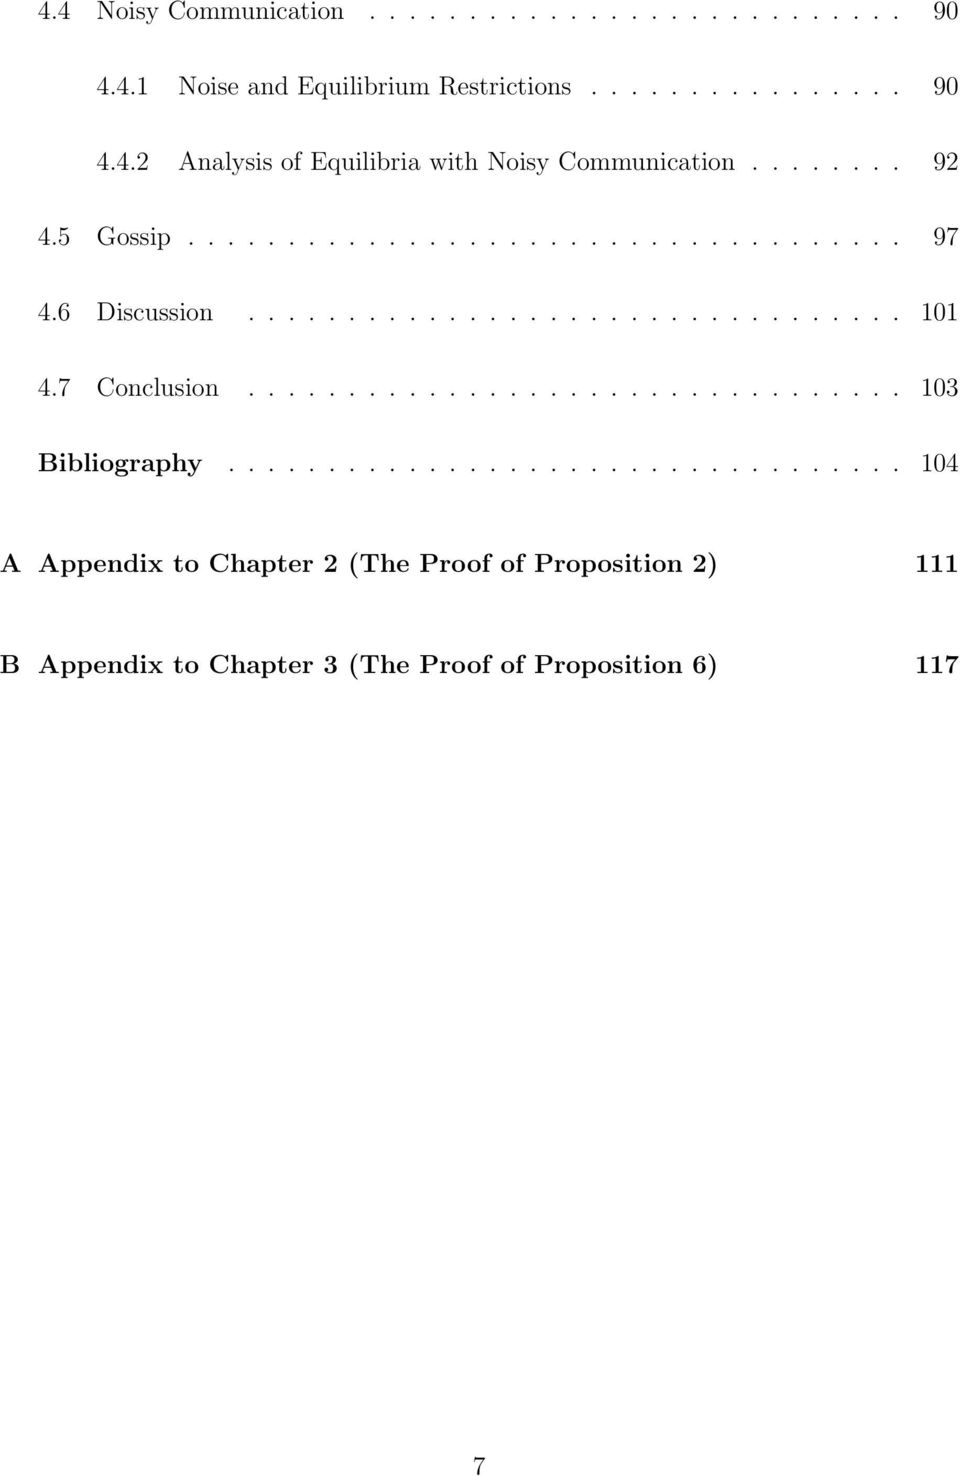 7 Conclusion................................. 103 Bibliography.